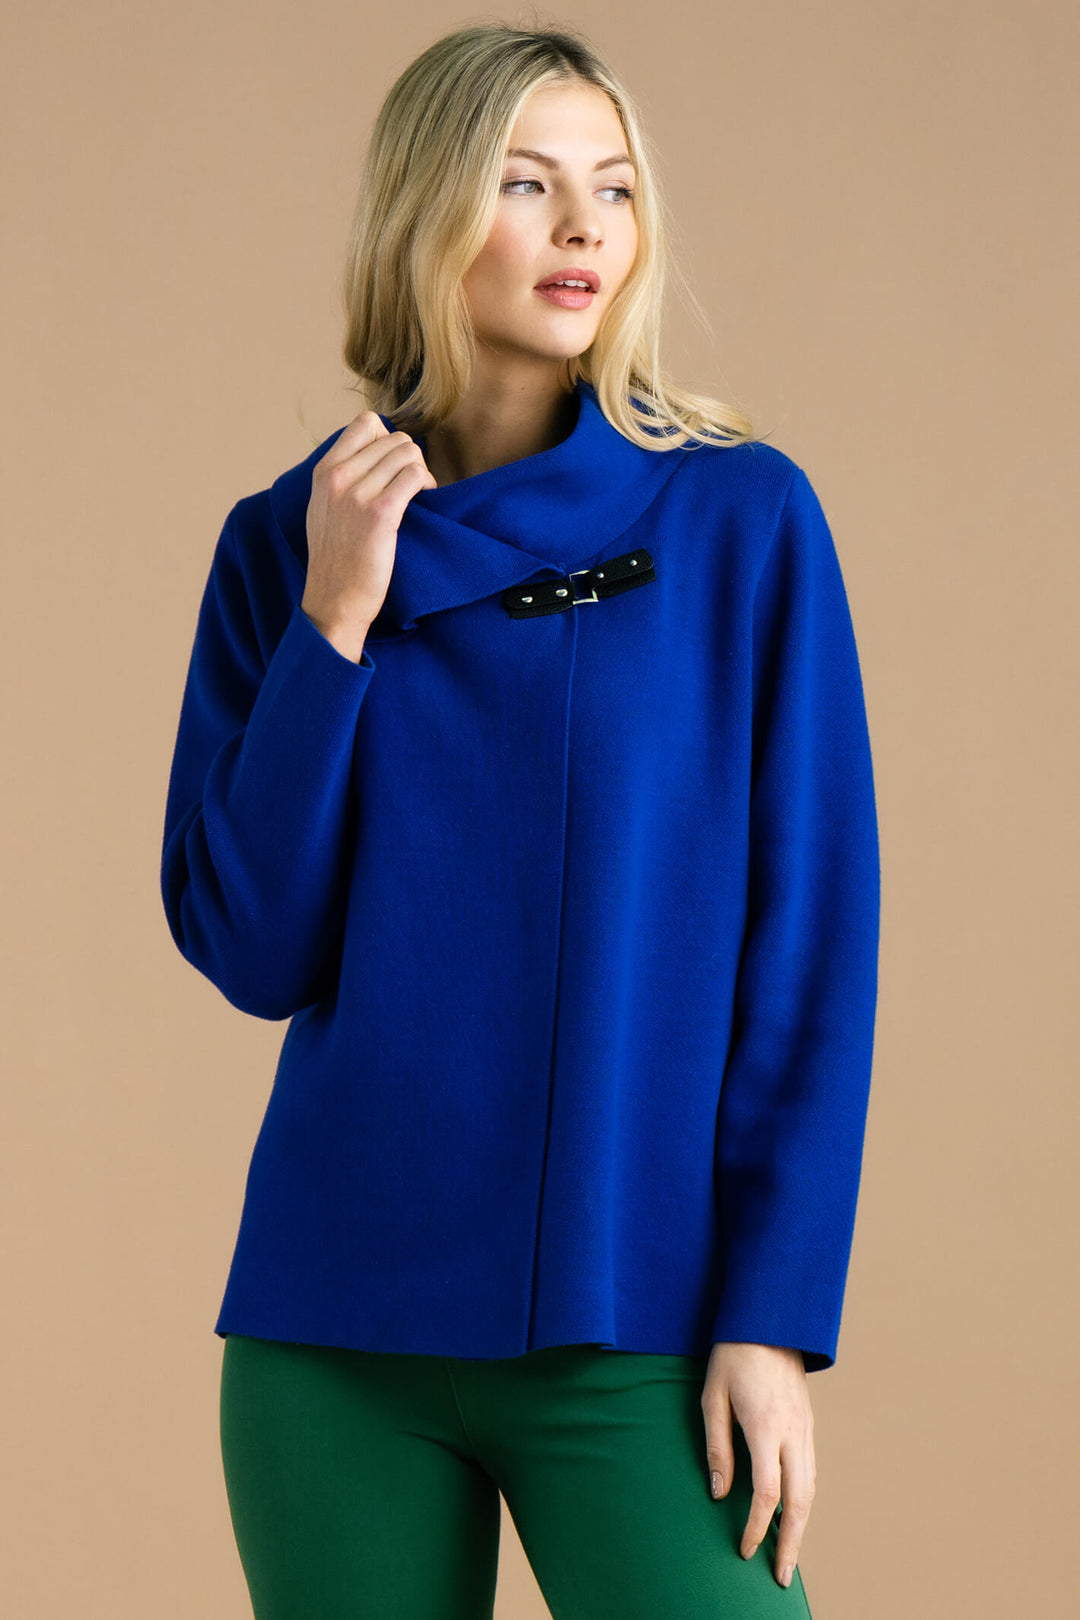 Marble Fashion 7178 210 Royal Blue Buckle Cardigan - Experience Boutique